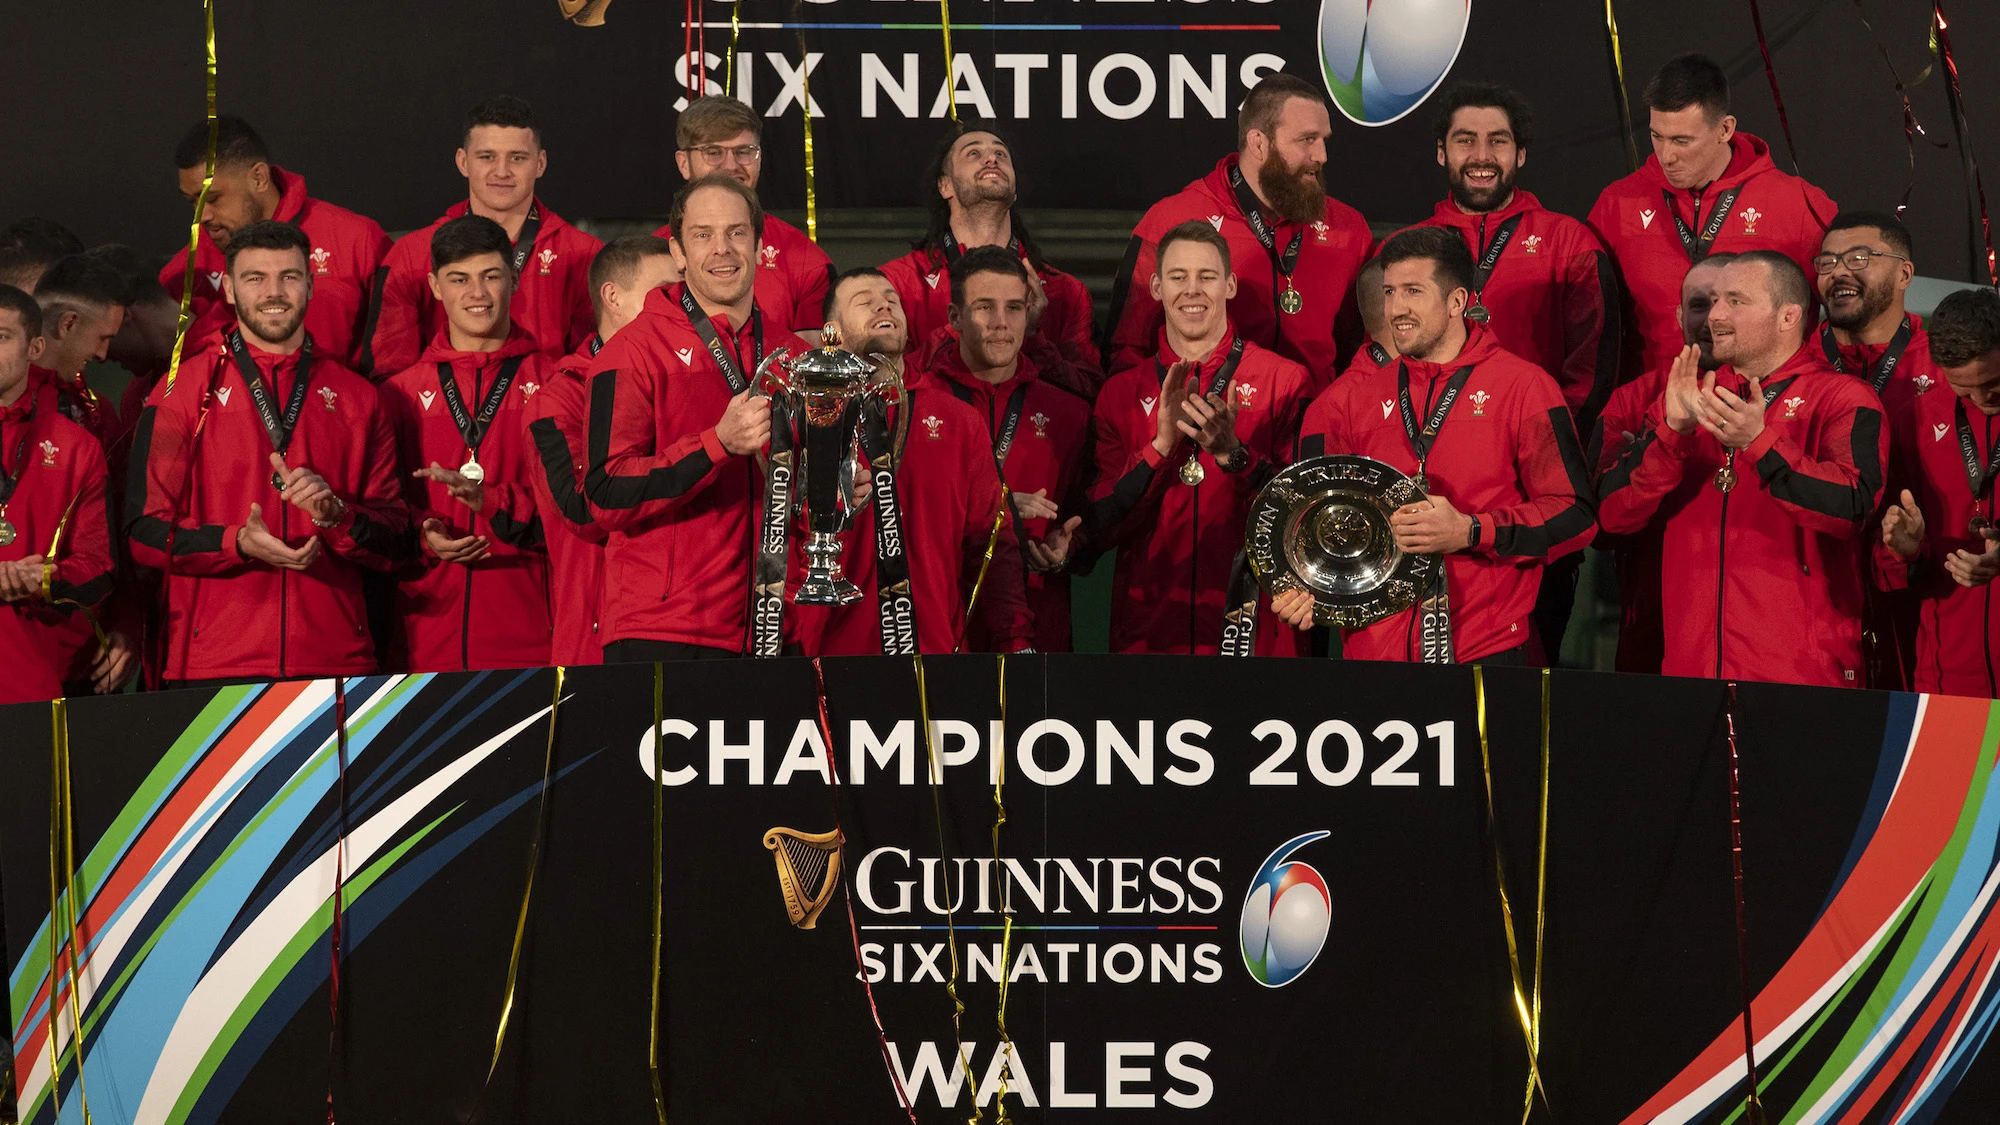 The Wales team are presented with the Guinness Six Nations trophy 27/3/2021